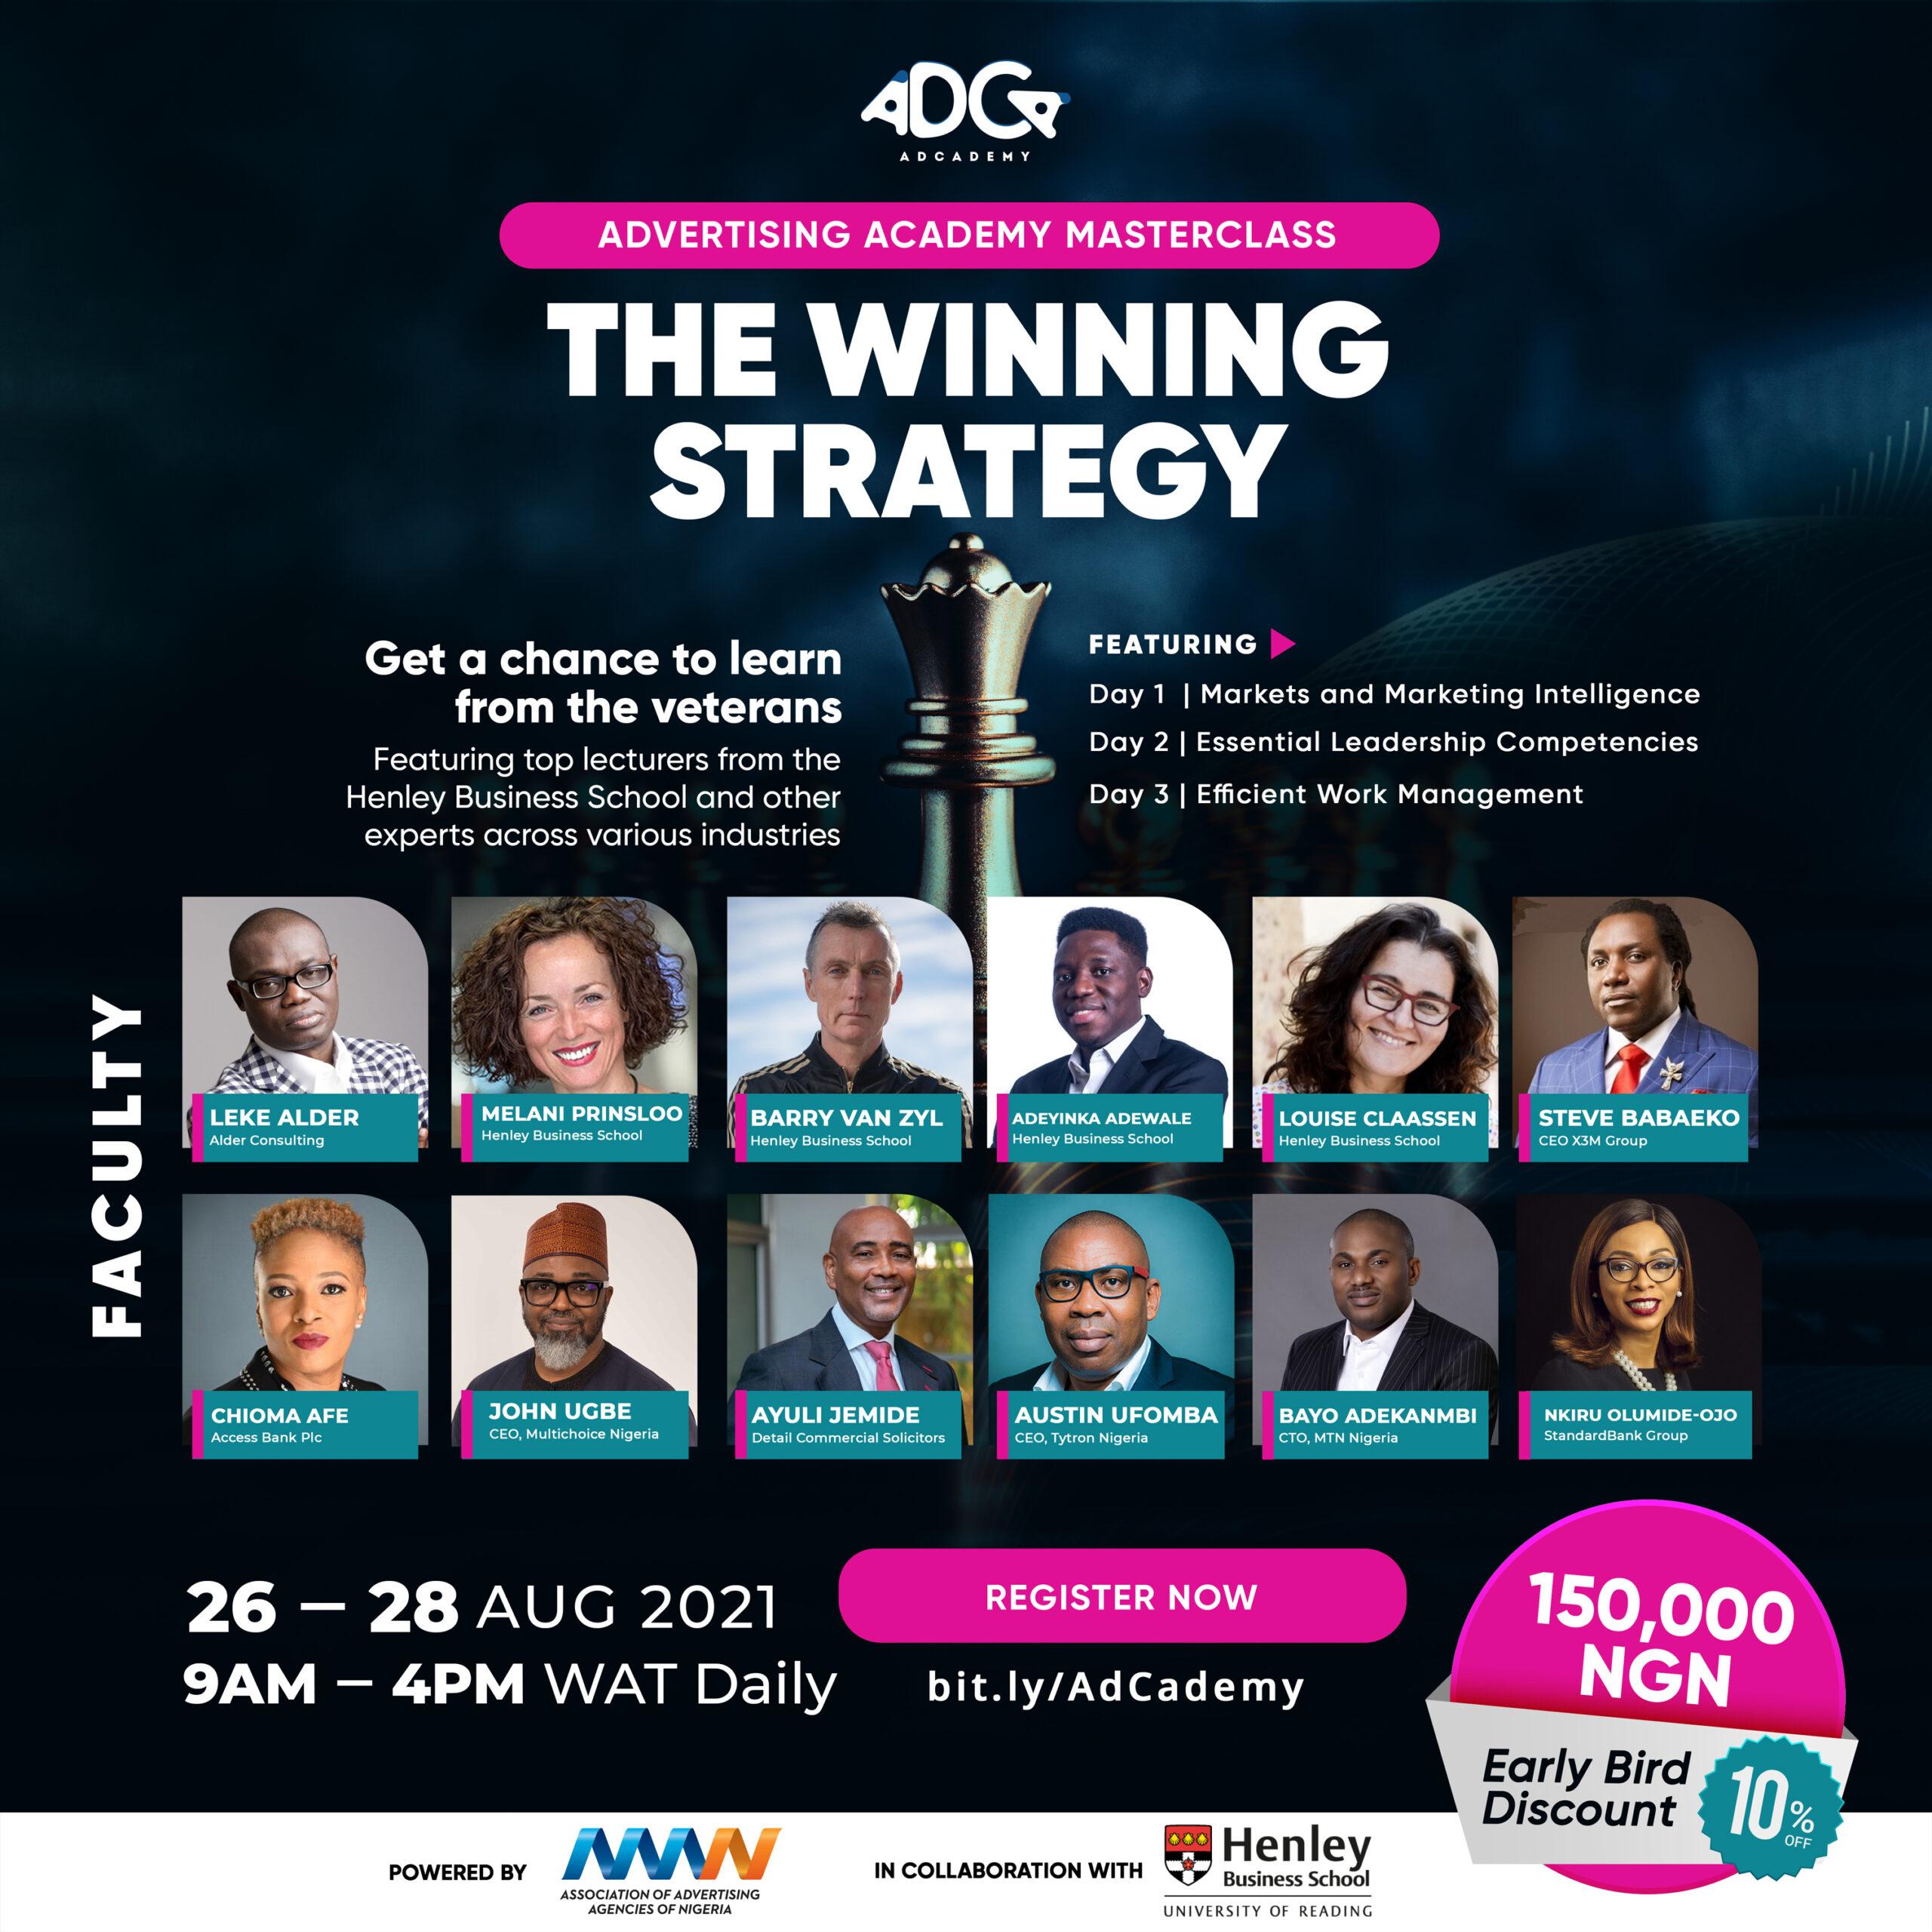 AAAN, AdCademy announce 10% discount for early Masterclass registration